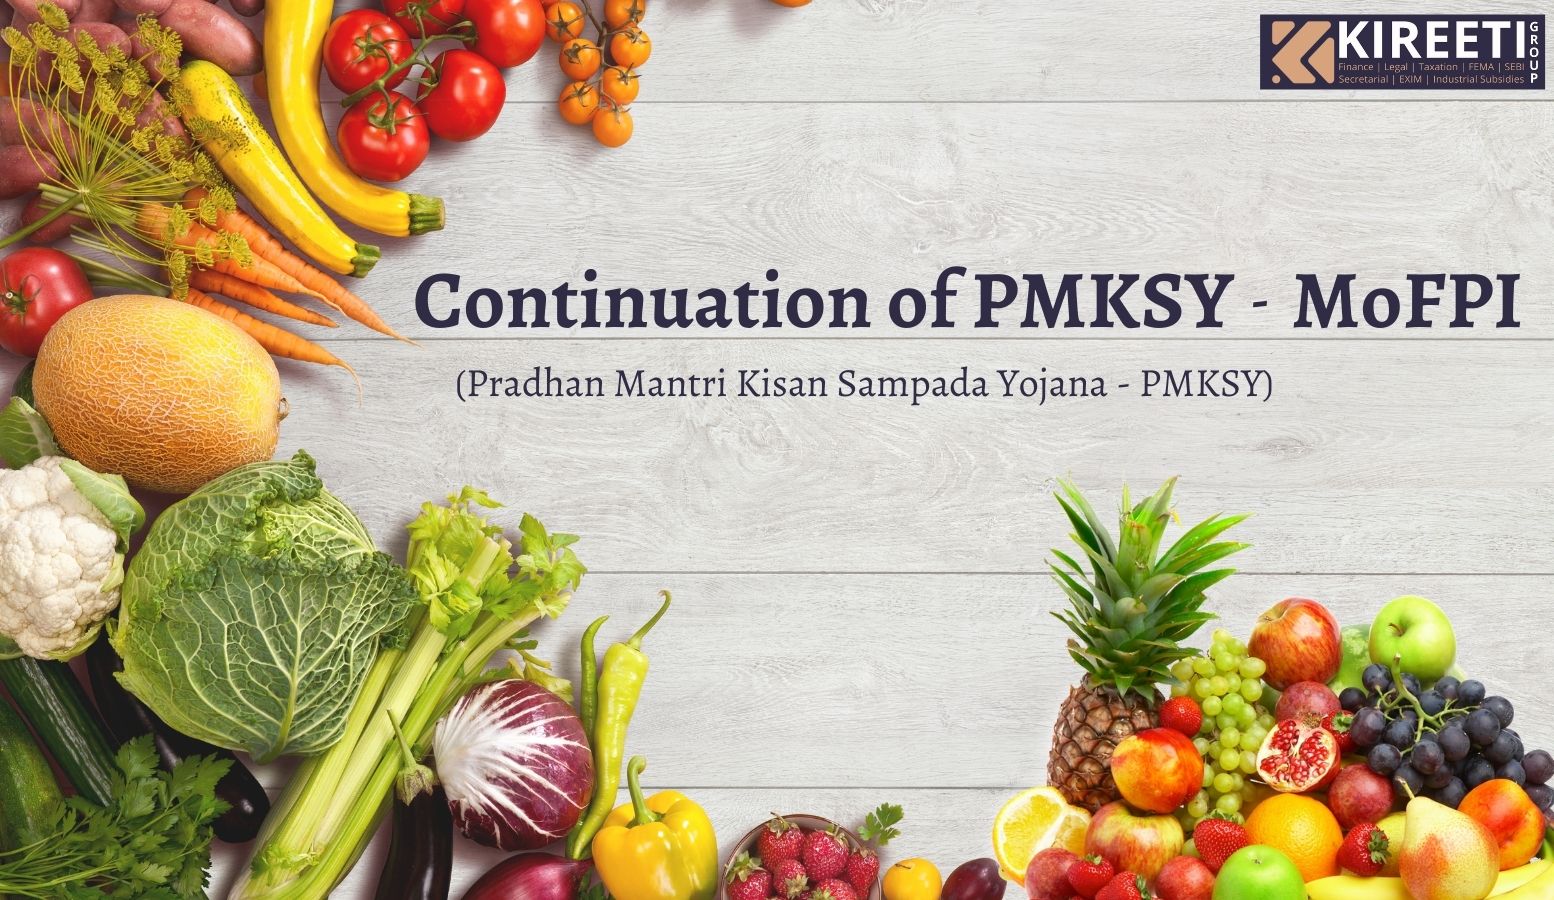 pmksy, mofpi, fps, food processing schemes, subsidy, kireeticonsultants, kcgroup 